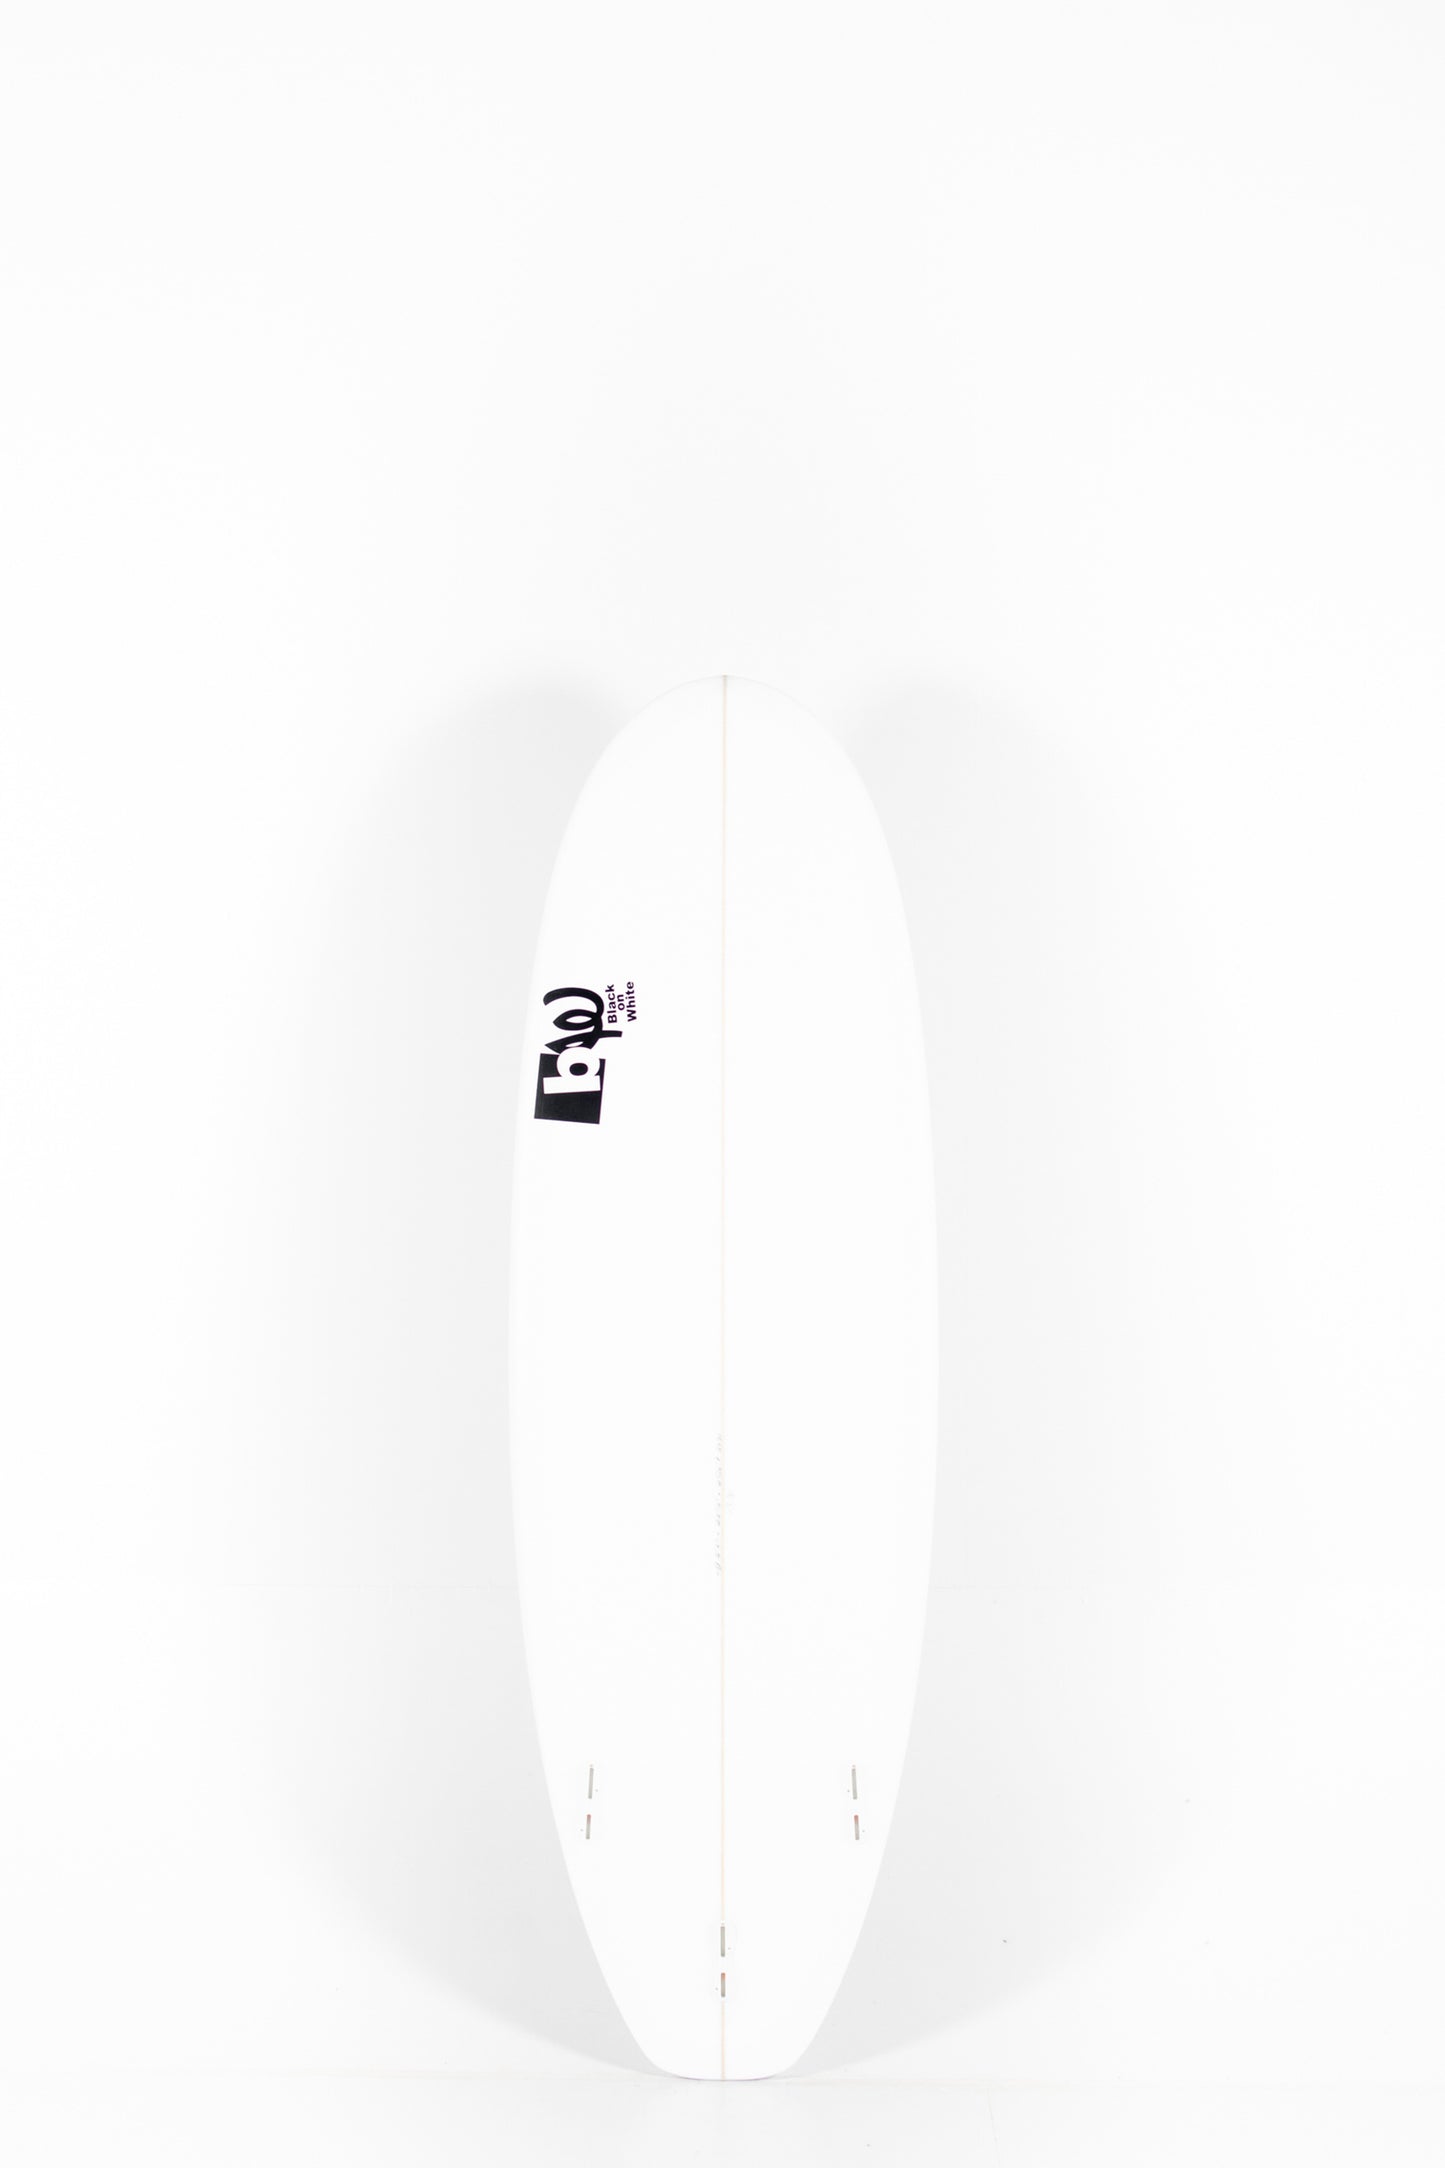 BW SURFBOARDS - BW SURFBOARDS Potato 6'2" x 22 1/2 x 2 5/8 x 44.7L. at PUKAS SURF SHOP